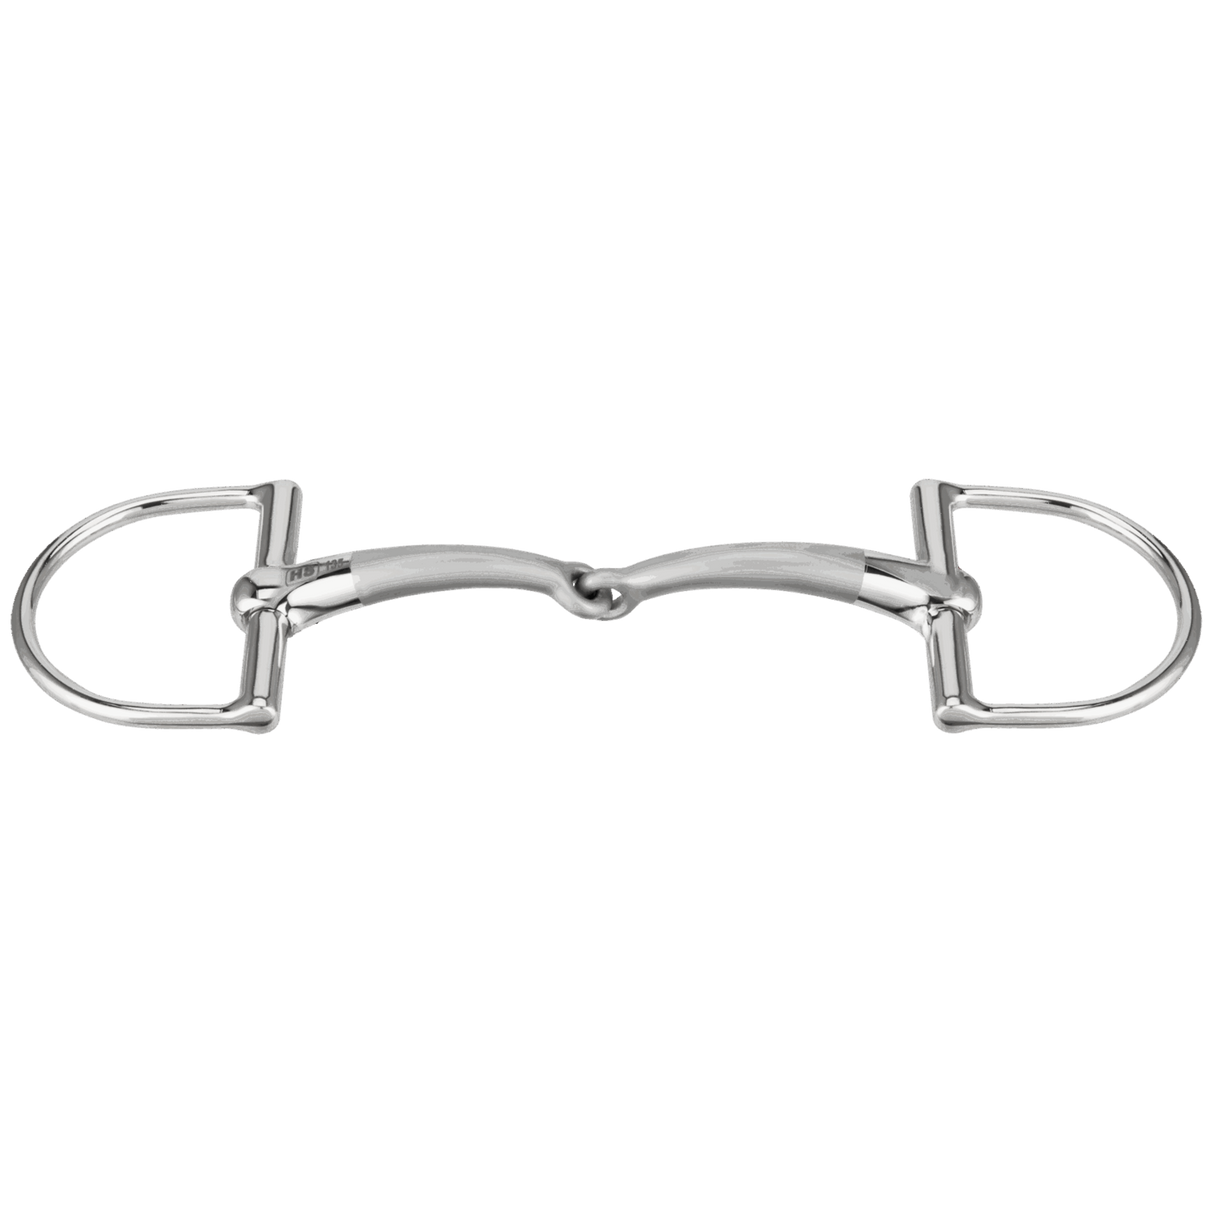 Sprenger Satinox D-Ring 14mm Stainless Steel Single Jointed 90mm Ring Snaffle